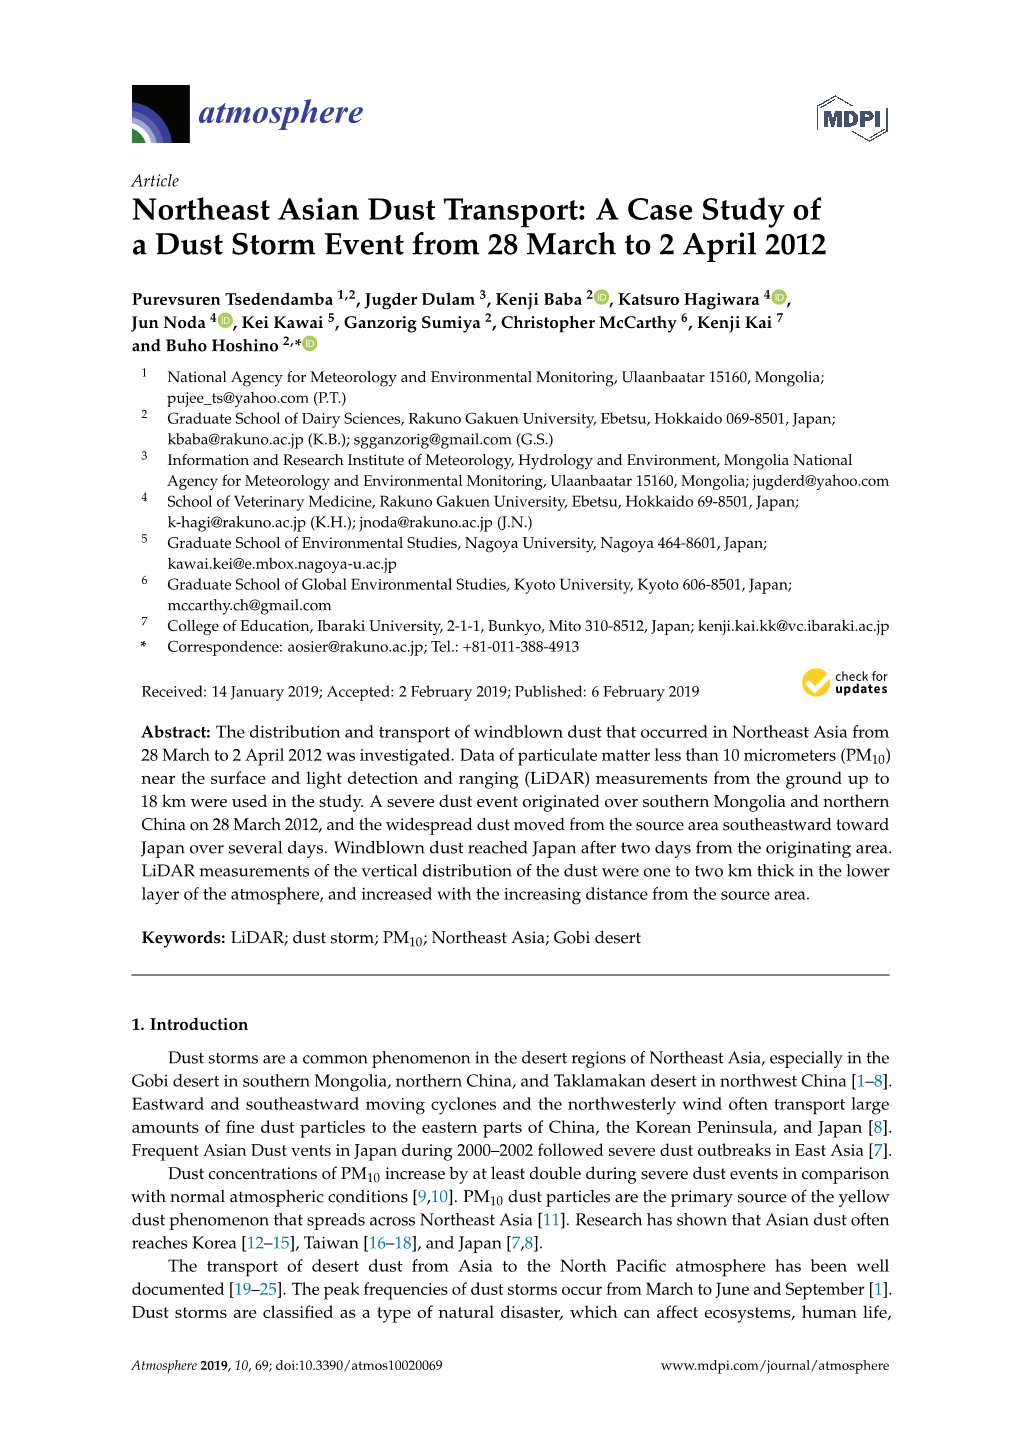 Northeast Asian Dust Transport: a Case Study of a Dust Storm Event from 28 March to 2 April 2012